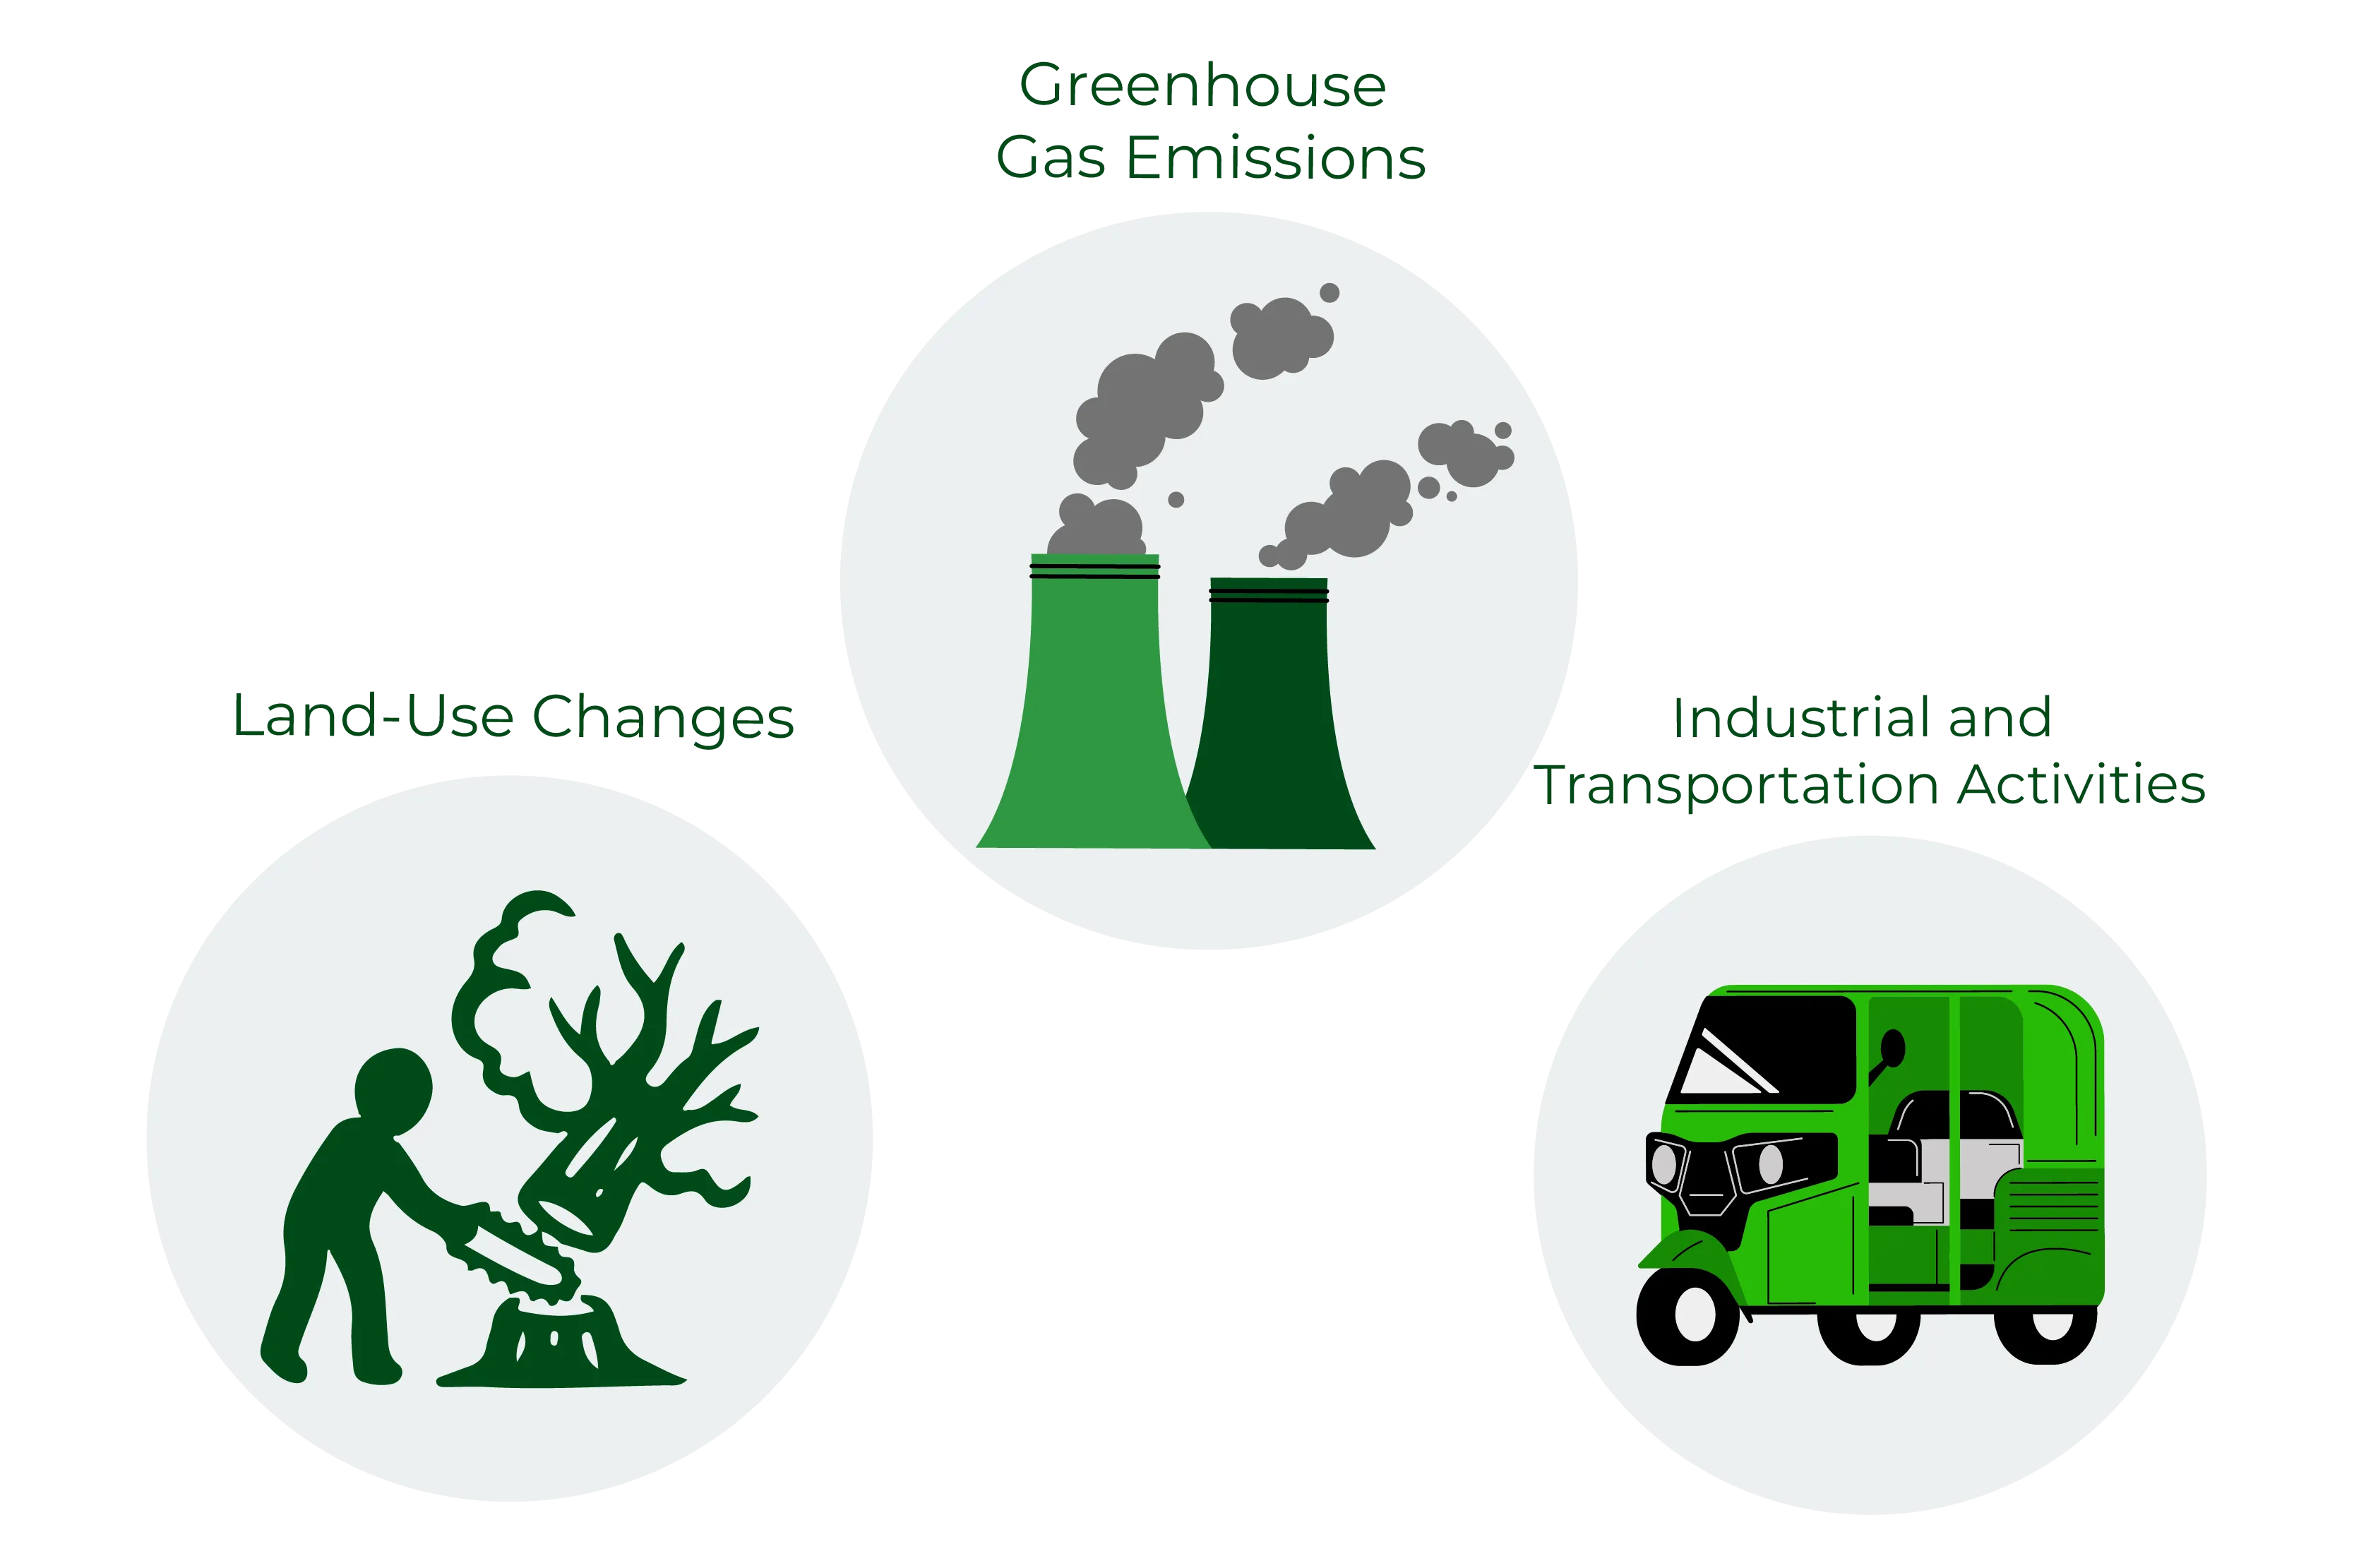 The illustration portrays three distinct symbols, each representing a factor contributing to climate change:  Greenhouse gas emissions: This symbol signifies the release of gases, such as carbon dioxide (CO2), methane (CH4), and nitrous oxide (N2O), into the atmosphere. These gases trap heat from the sun, leading to the greenhouse effect and global warming.  Land use changes: This symbol represents alterations in land cover and land use practices. Activities like deforestation, urbanization, and agricultural expansion can impact climate by affecting the balance of carbon stored in vegetation and soils.  Industrial and transportation activities: This symbol represents human activities related to industry and transportation, such as the burning of fossil fuels for energy production and transportation purposes. These activities release greenhouse gases into the atmosphere, contributing to climate change.  The illustration aims to highlight these key factors that contribute to climate change. It emphasizes the significance of reducing greenhouse gas emissions, promoting sustainable land use practices, and transitioning to cleaner and more efficient industrial and transportation systems. By understanding and addressing these factors, we can work towards mitigating climate change and promoting a more sustainable future.